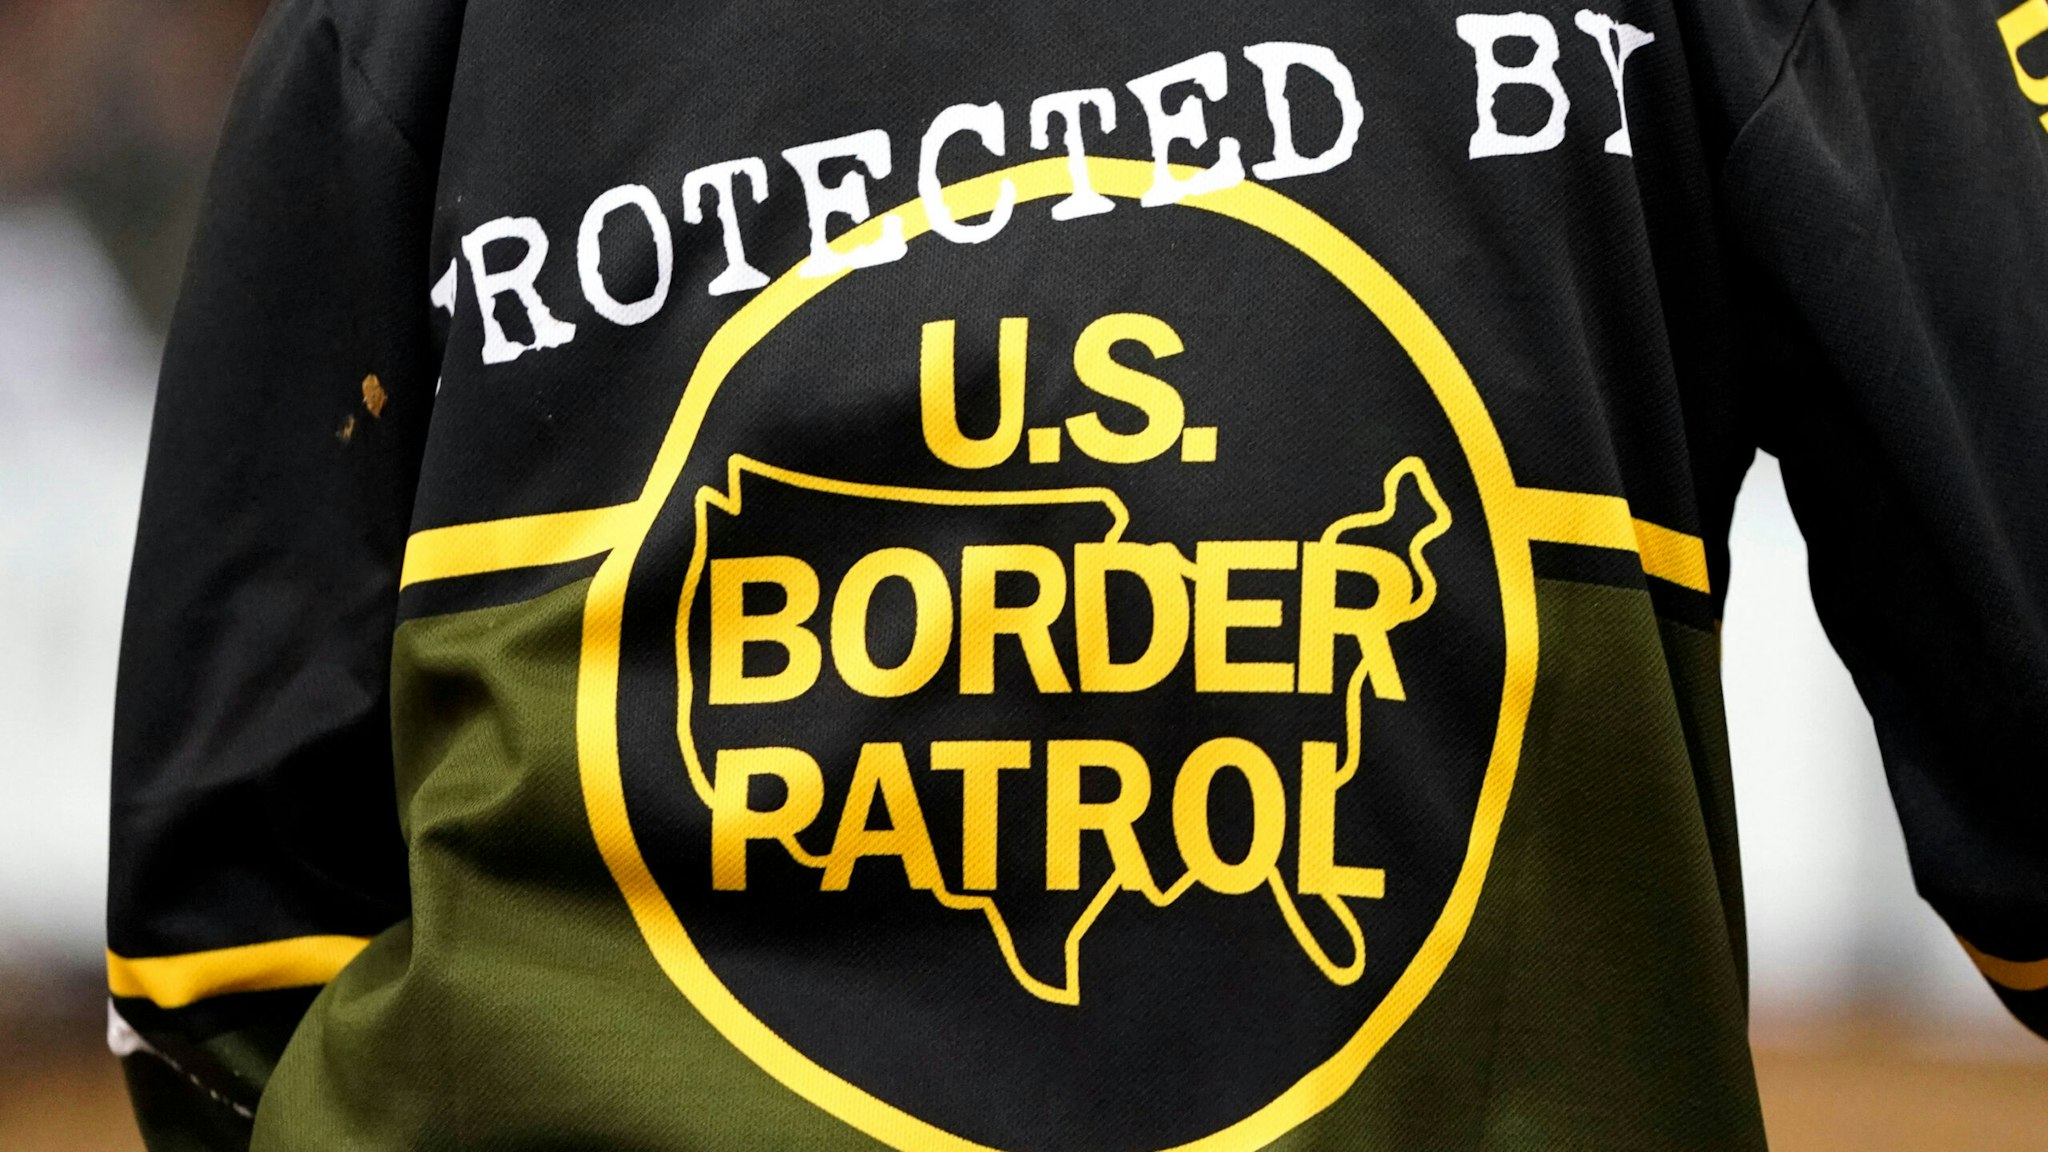 A rodeo ring Bullfighter wears a shirt with the message "Protected by US Border Patrol" during the PBR Unleash The Beast Monster Energy Buckoff at Madison Square Garden in New York, January 7, 2022.